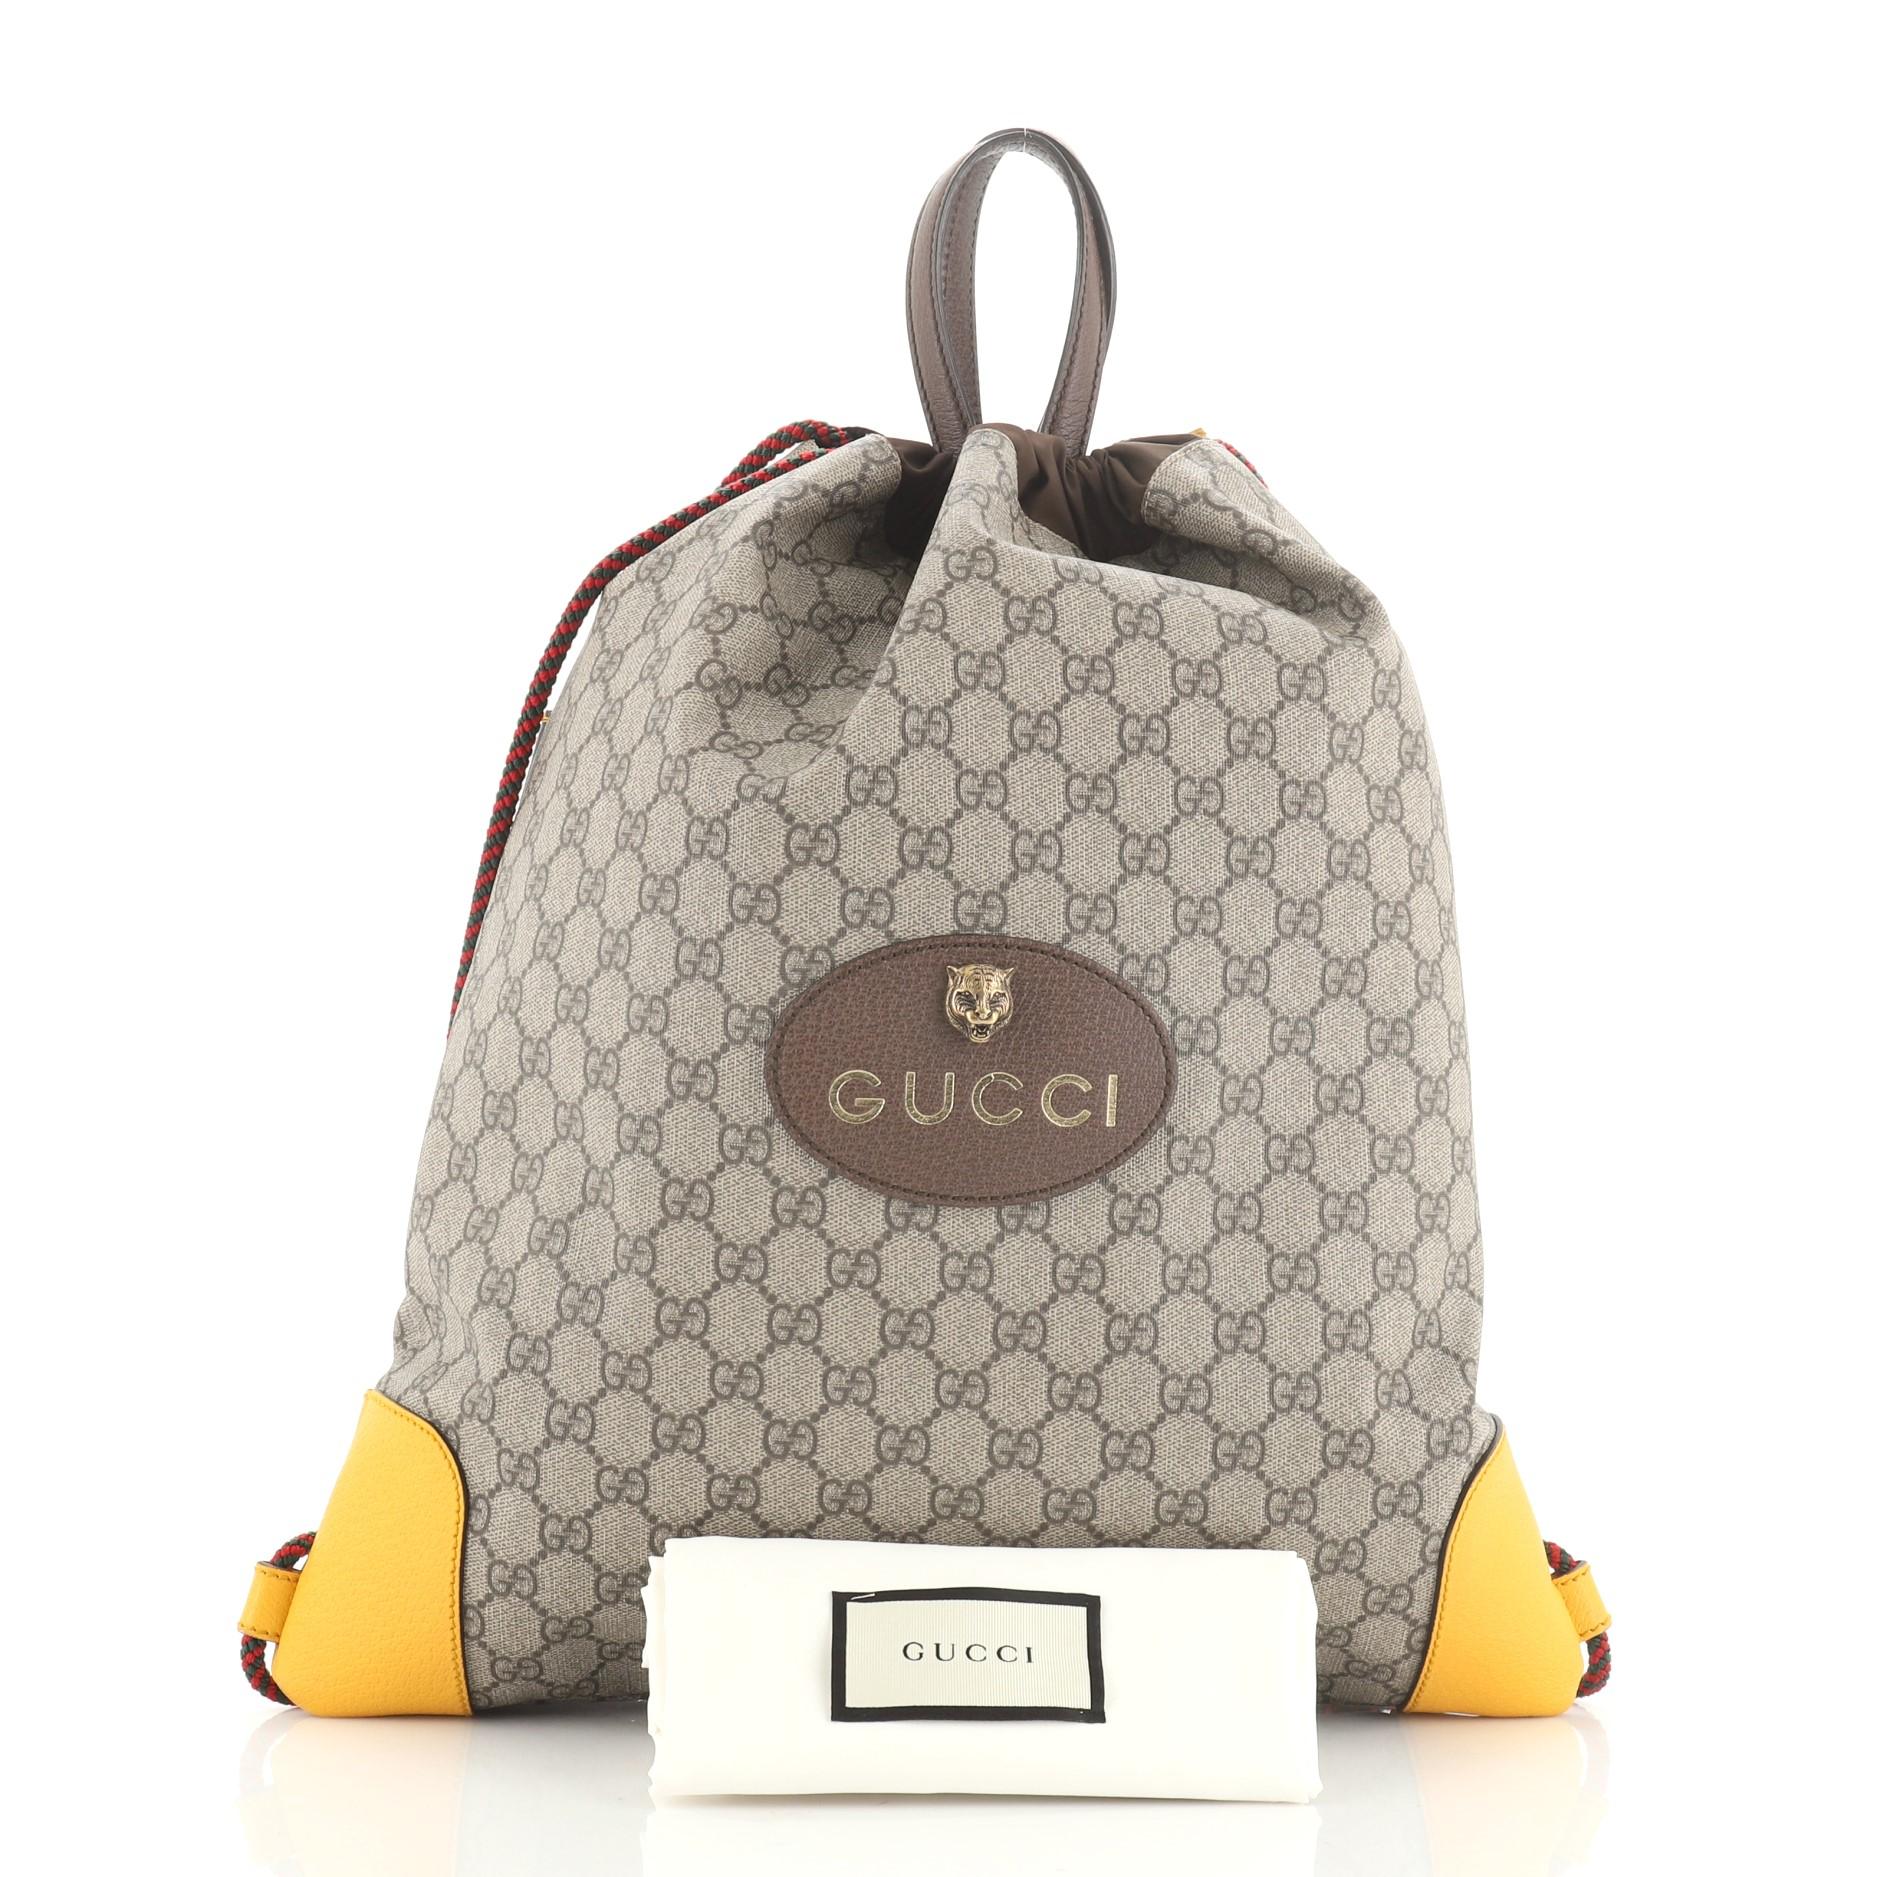 This Gucci Animalier Drawstring Backpack GG Coated Canvas Large, crafted from brown GG coated canvas, features dual top handles, rope straps that double function as drawstring, and aged gold-tone hardware. Its drawstring closure opens to a brown